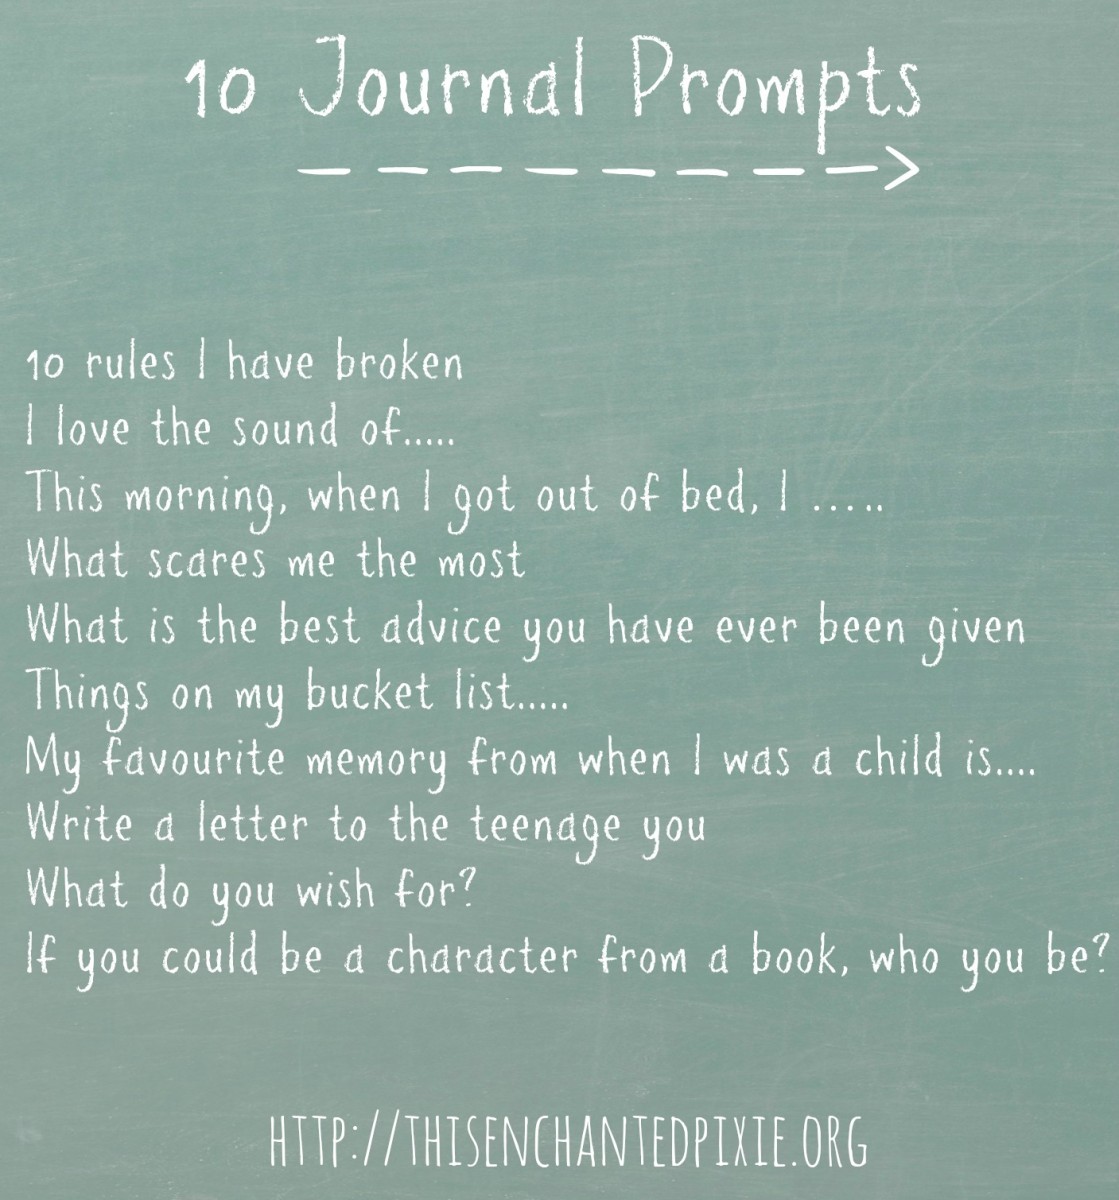 relationship things  Relationship journal, Journal writing prompts, Journal  prompts